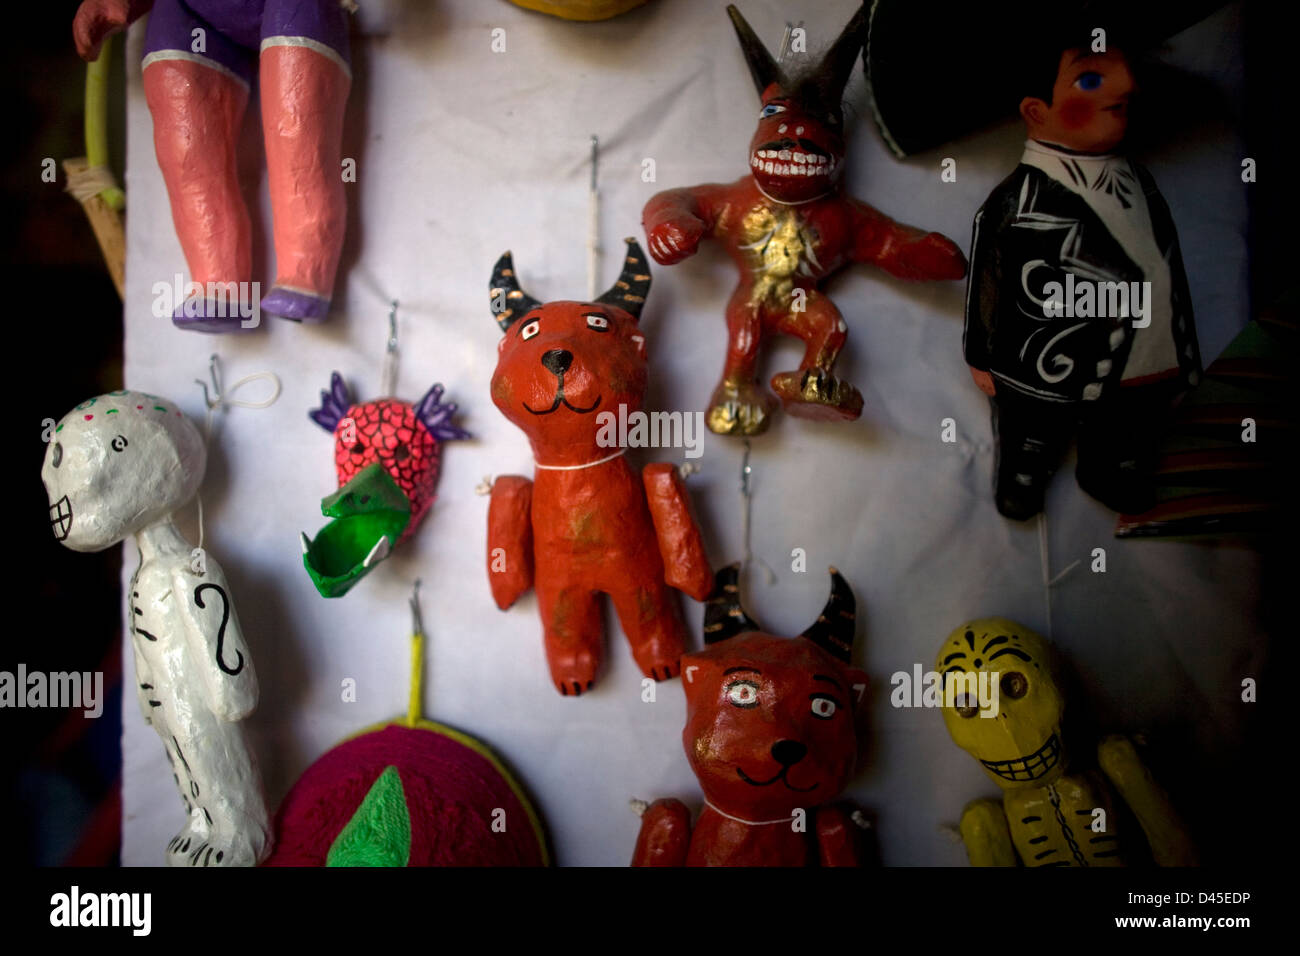 Paper mache dolls representing red devils and skeletons sit for sale in a Mexican folk-art workshop. Stock Photo